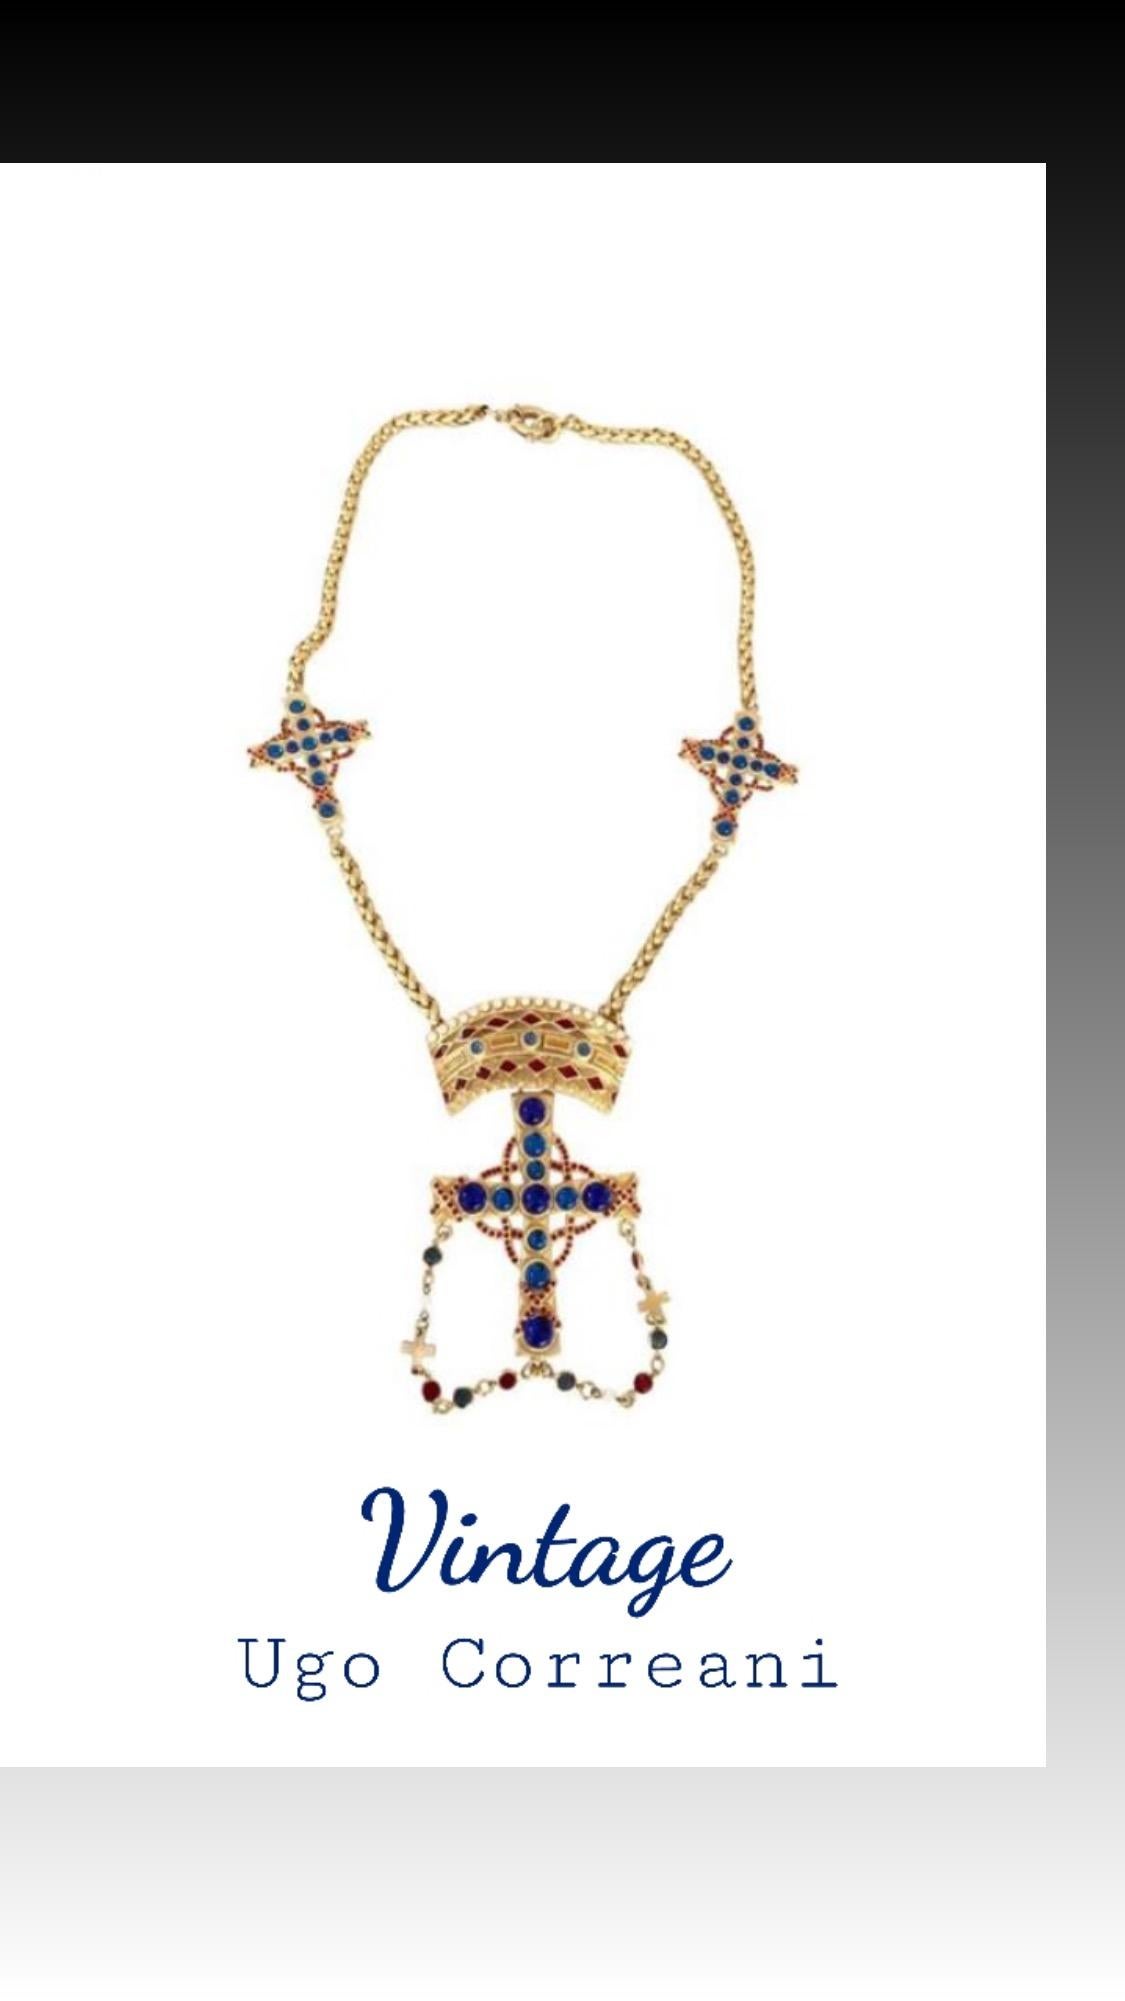 Baroque Gianni Versace by Ugo Correani Triple cross pendant necklace, 1980s  For Sale